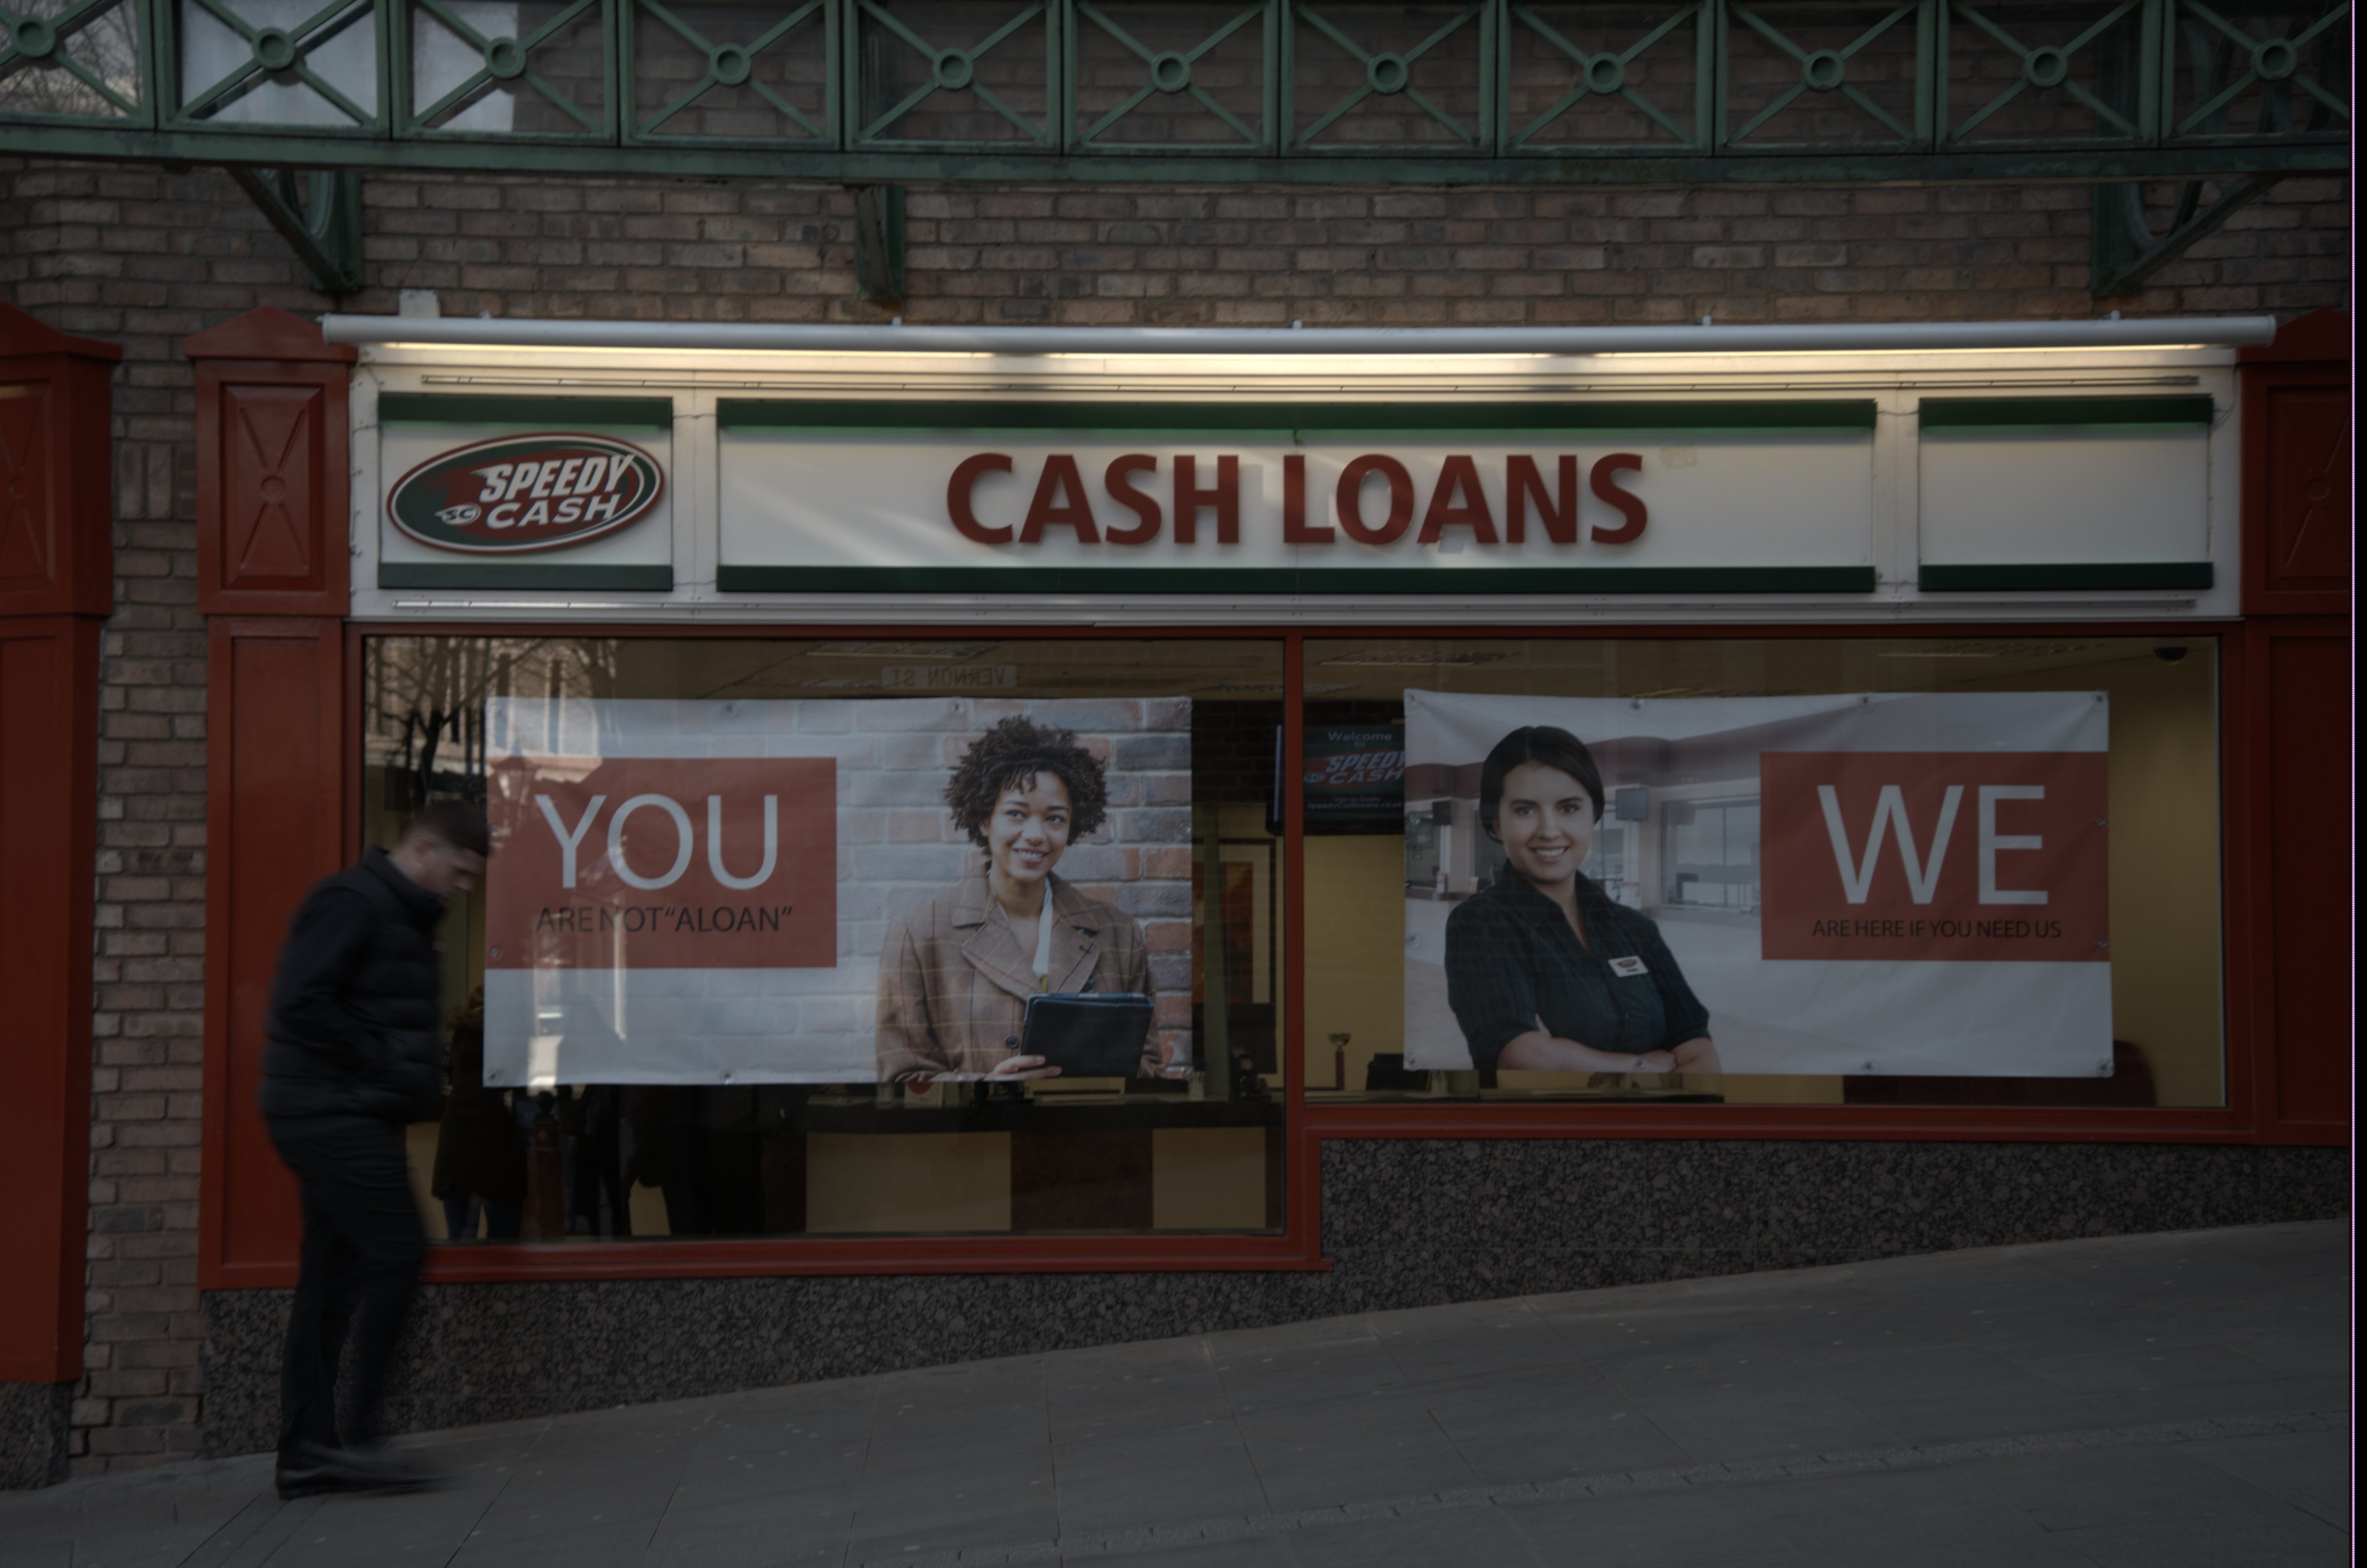 Payday Loan Companies Criticised by the Financial Conduct Authority